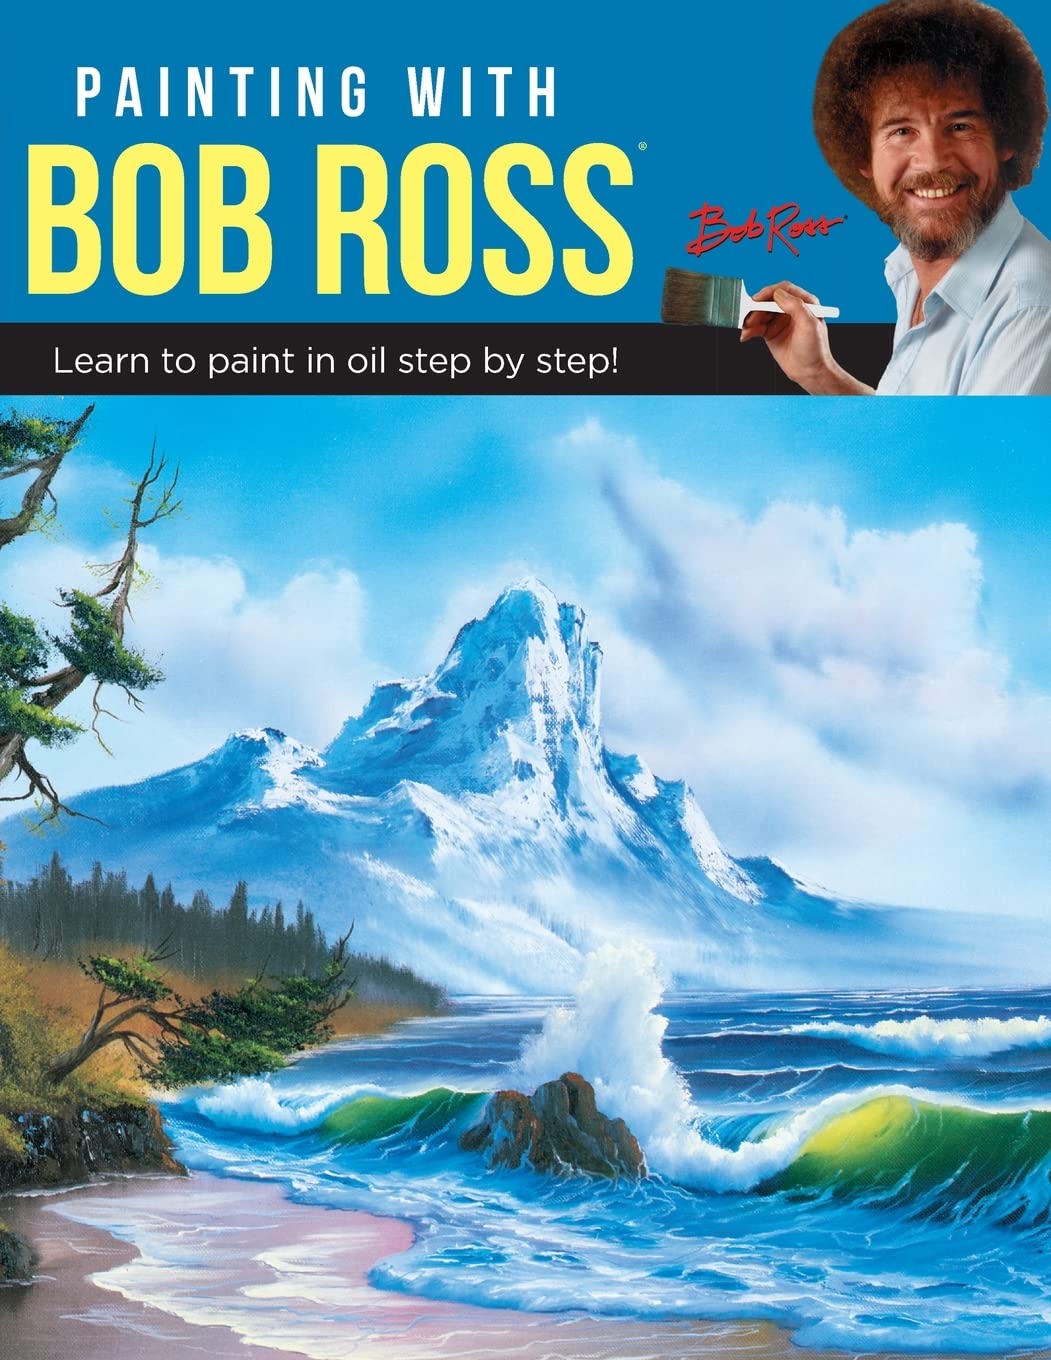 Painting with Bob Ross: Learn to paint in oil step by step